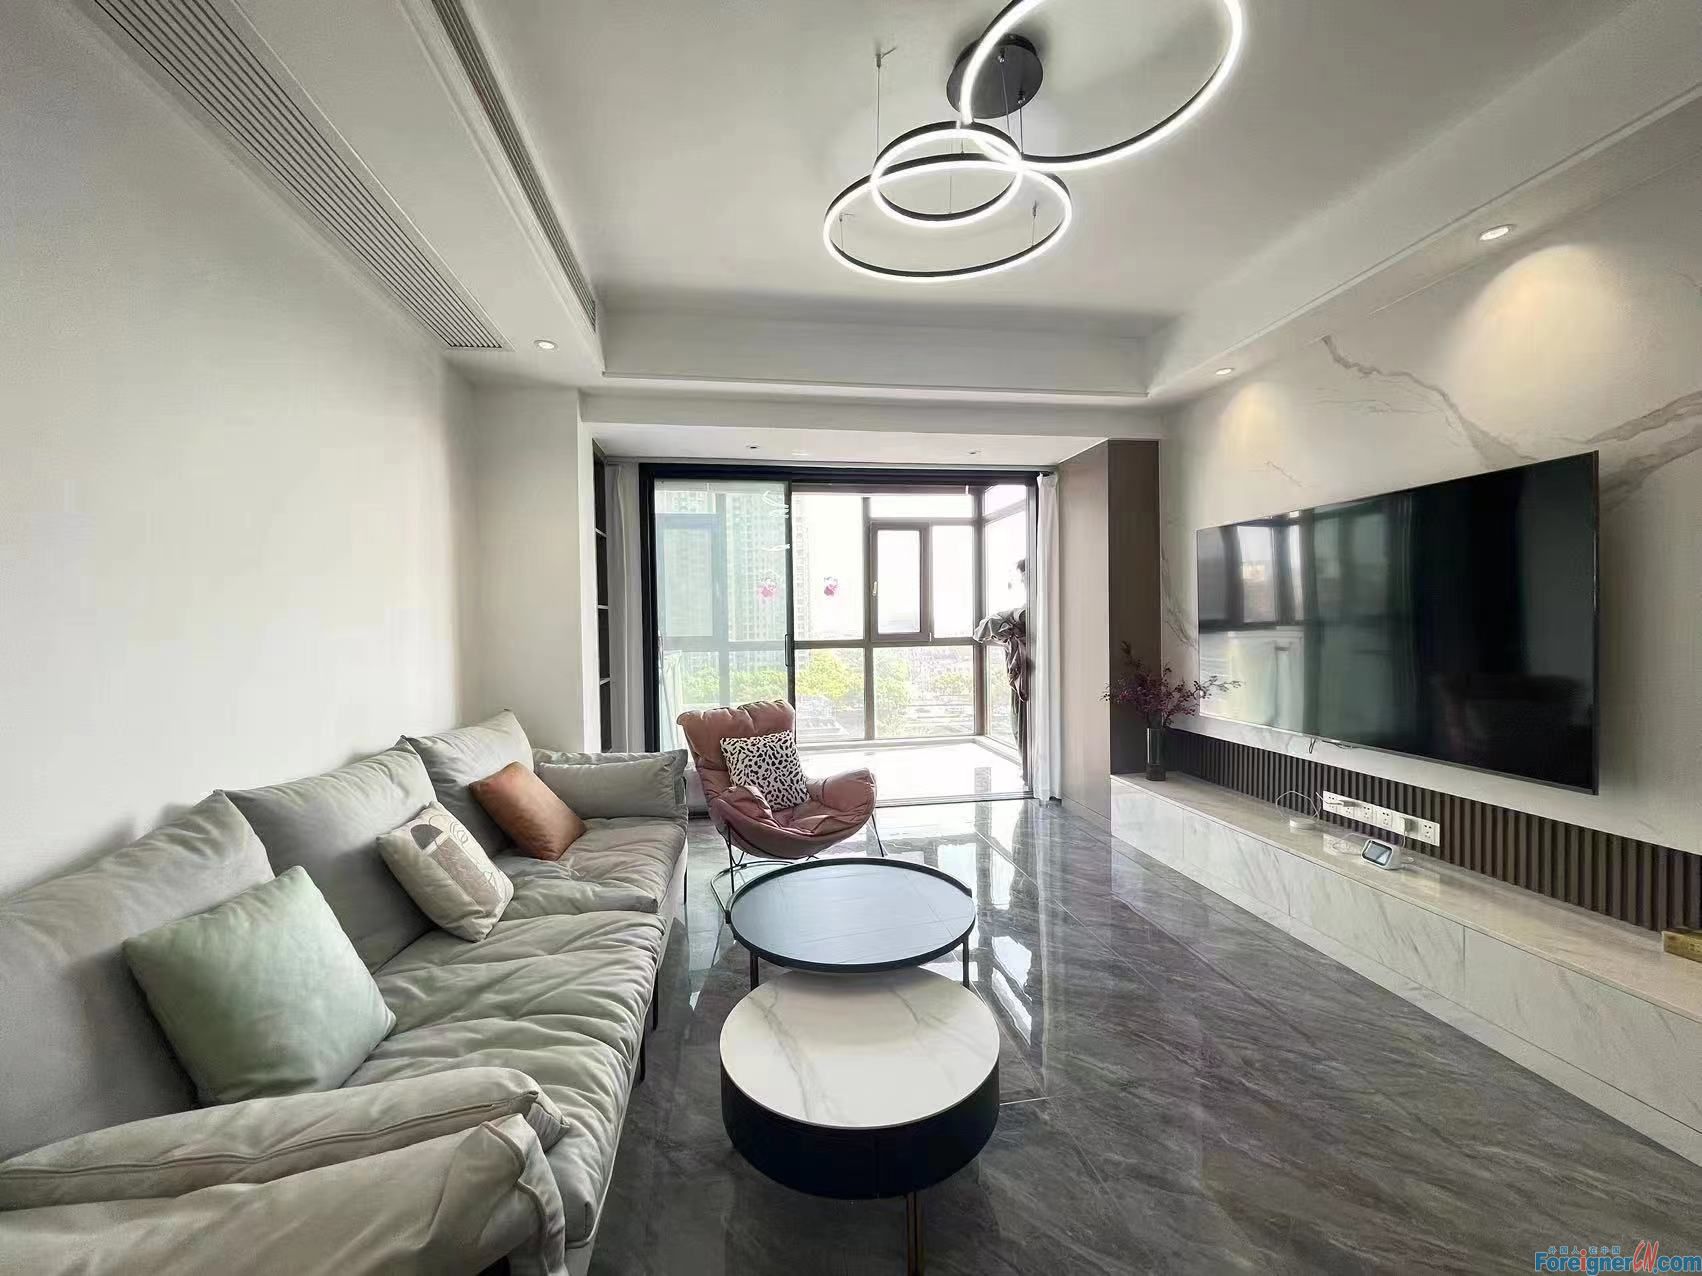 Stunning!!! Duplex Apartment to Rent in Suzhou/ 4 rooms and 3 baths/Spacious,Brand new /Floor heating，Central AC ,bathtub/close to Subway Station ,Shopping mall